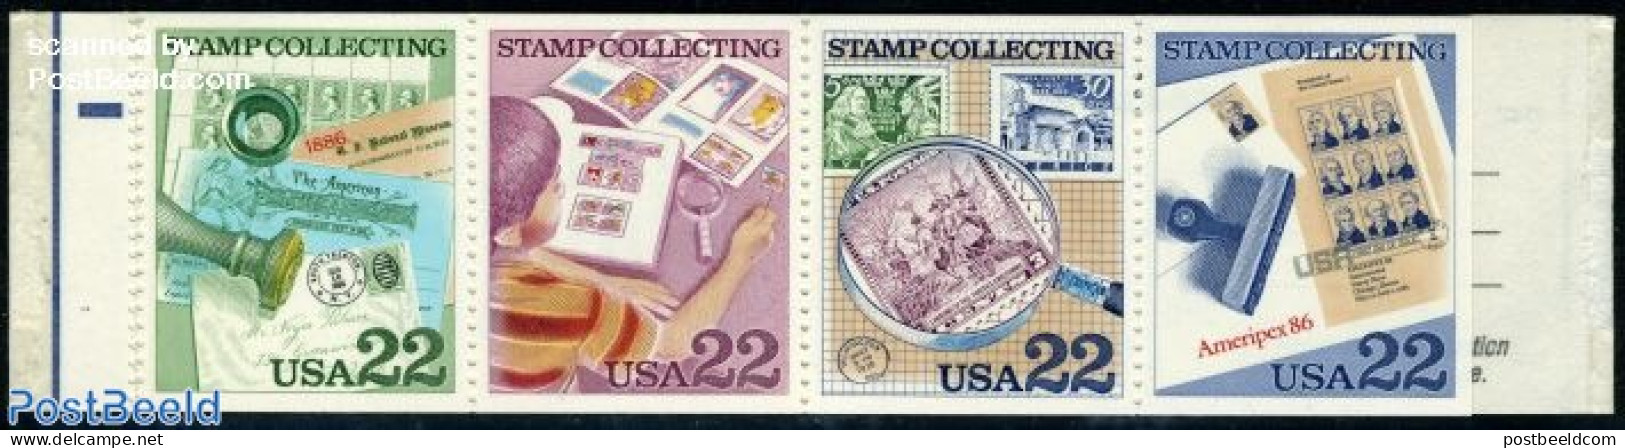 United States Of America 1986 Ameripex Booklet, Mint NH, Philately - Stamp Booklets - Stamps On Stamps - Nuevos